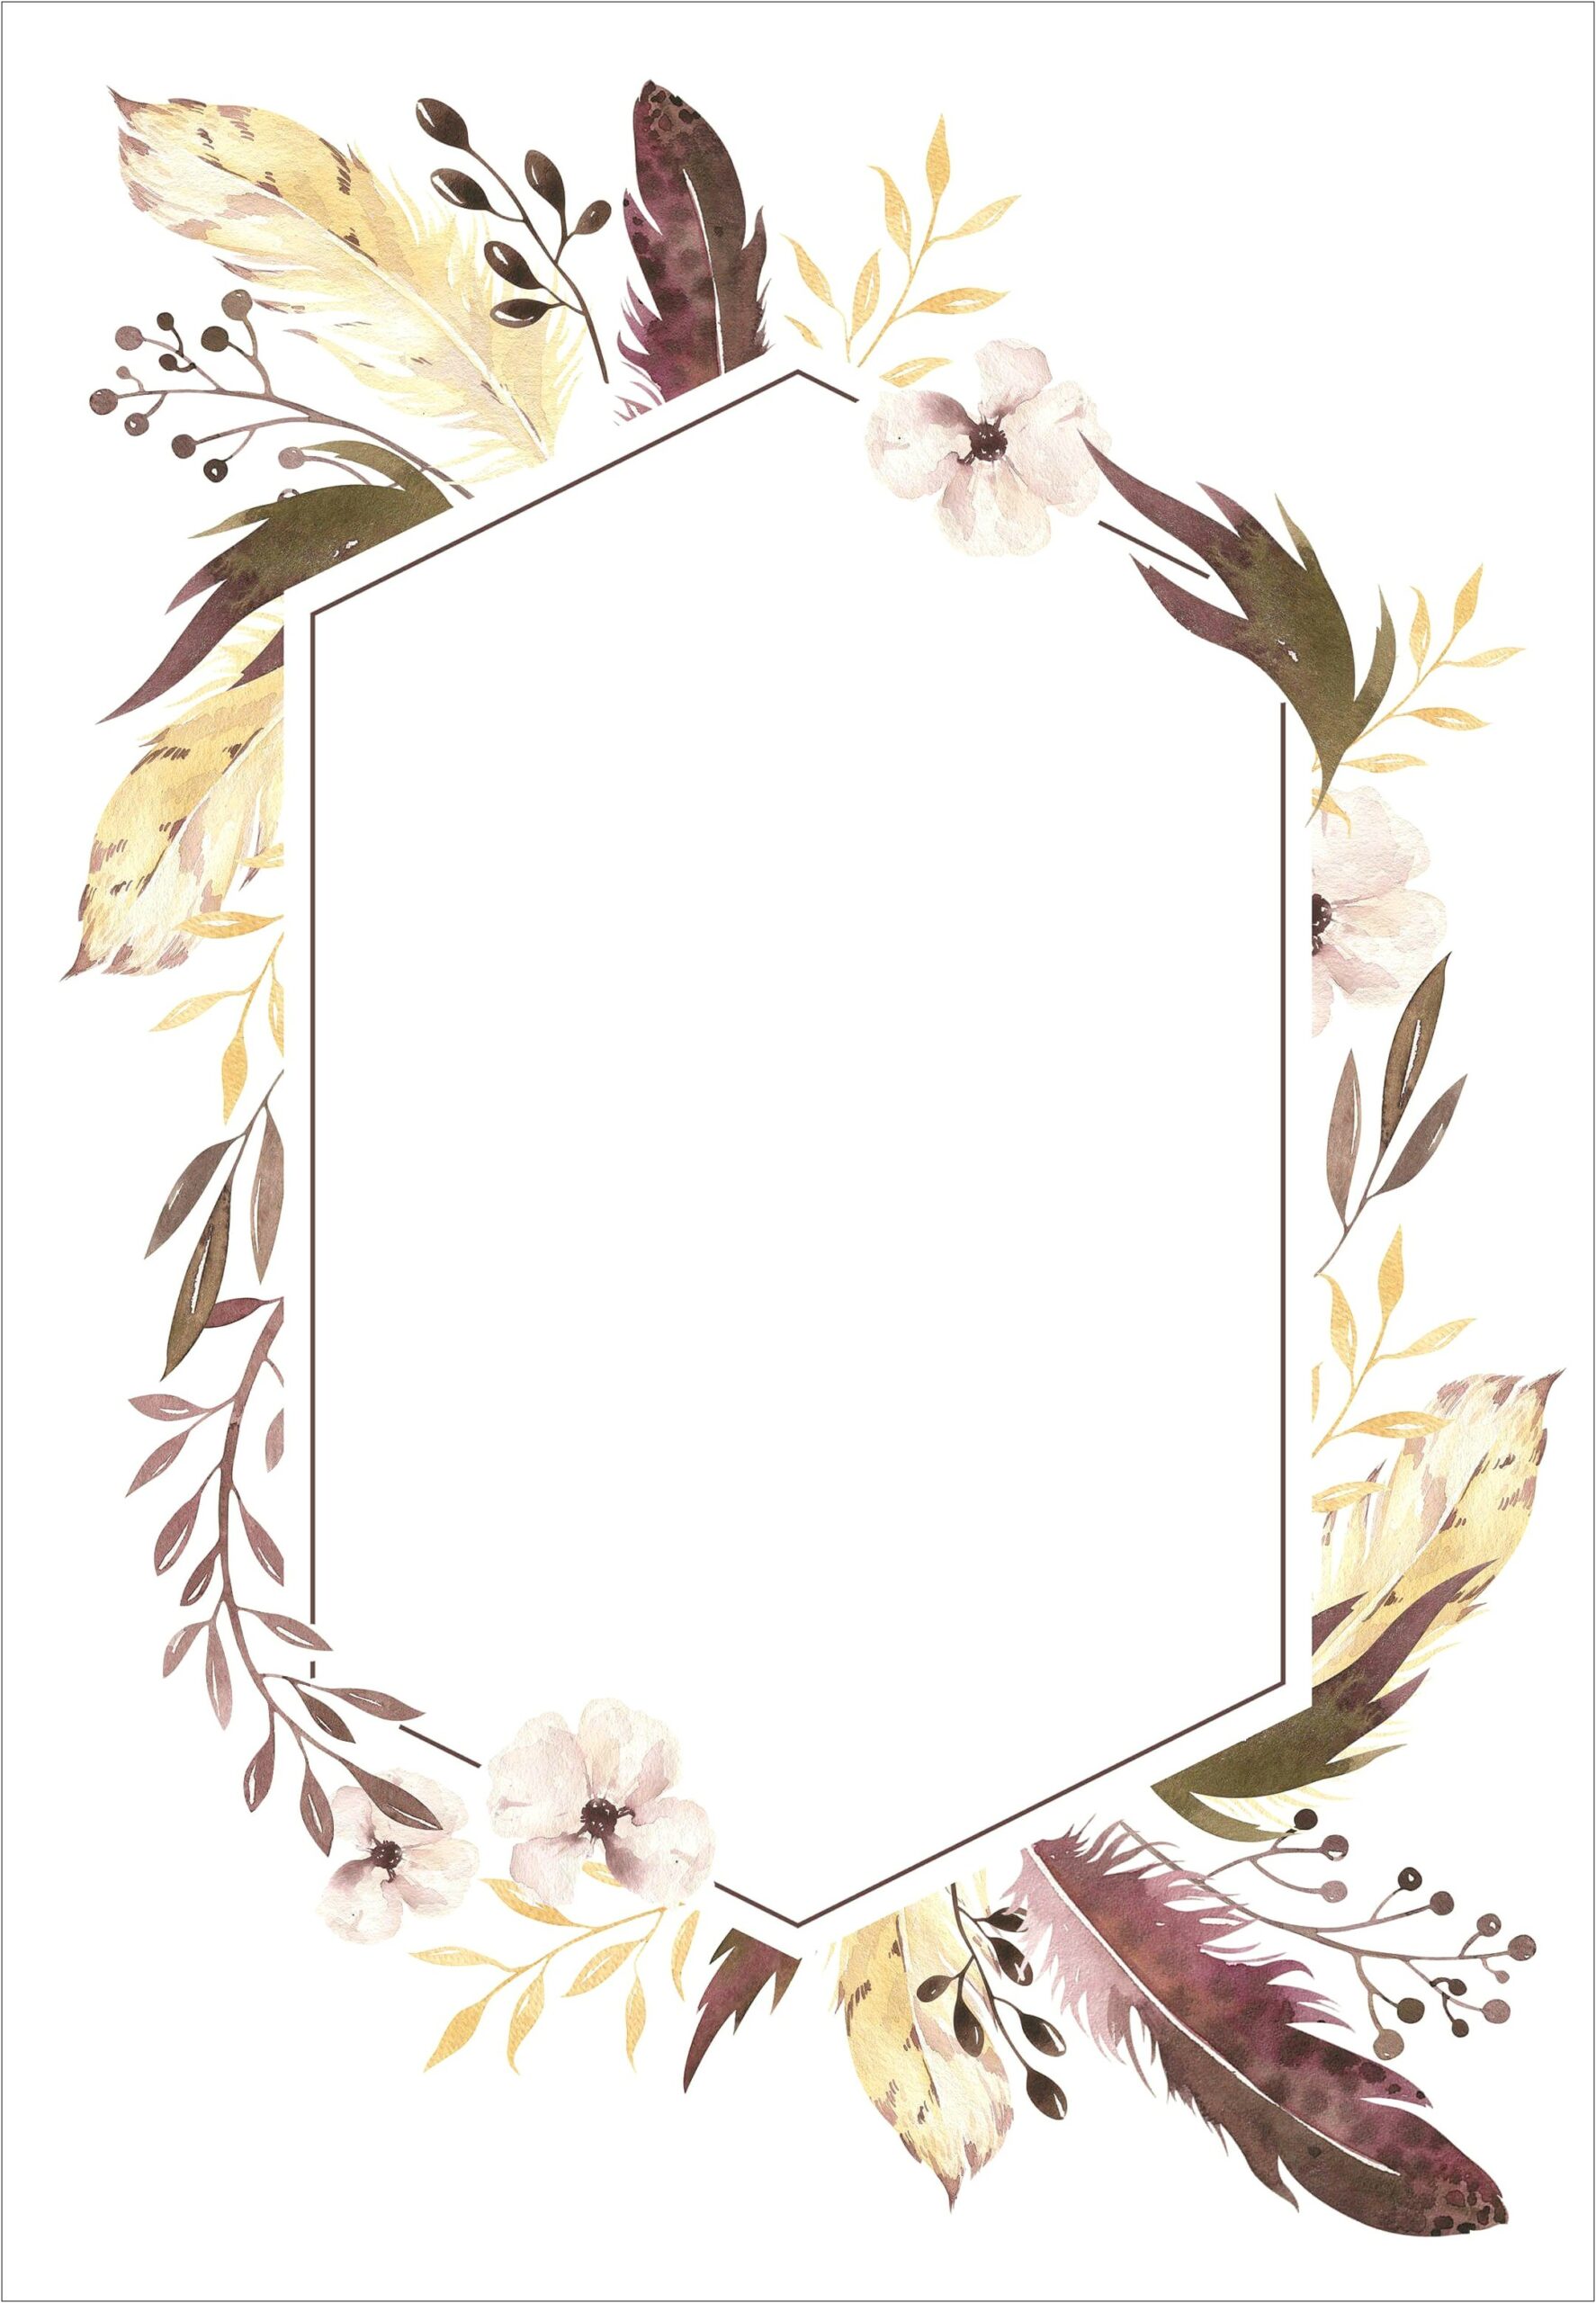 Grassy Floral Borders For Wedding Invitation Free Templates